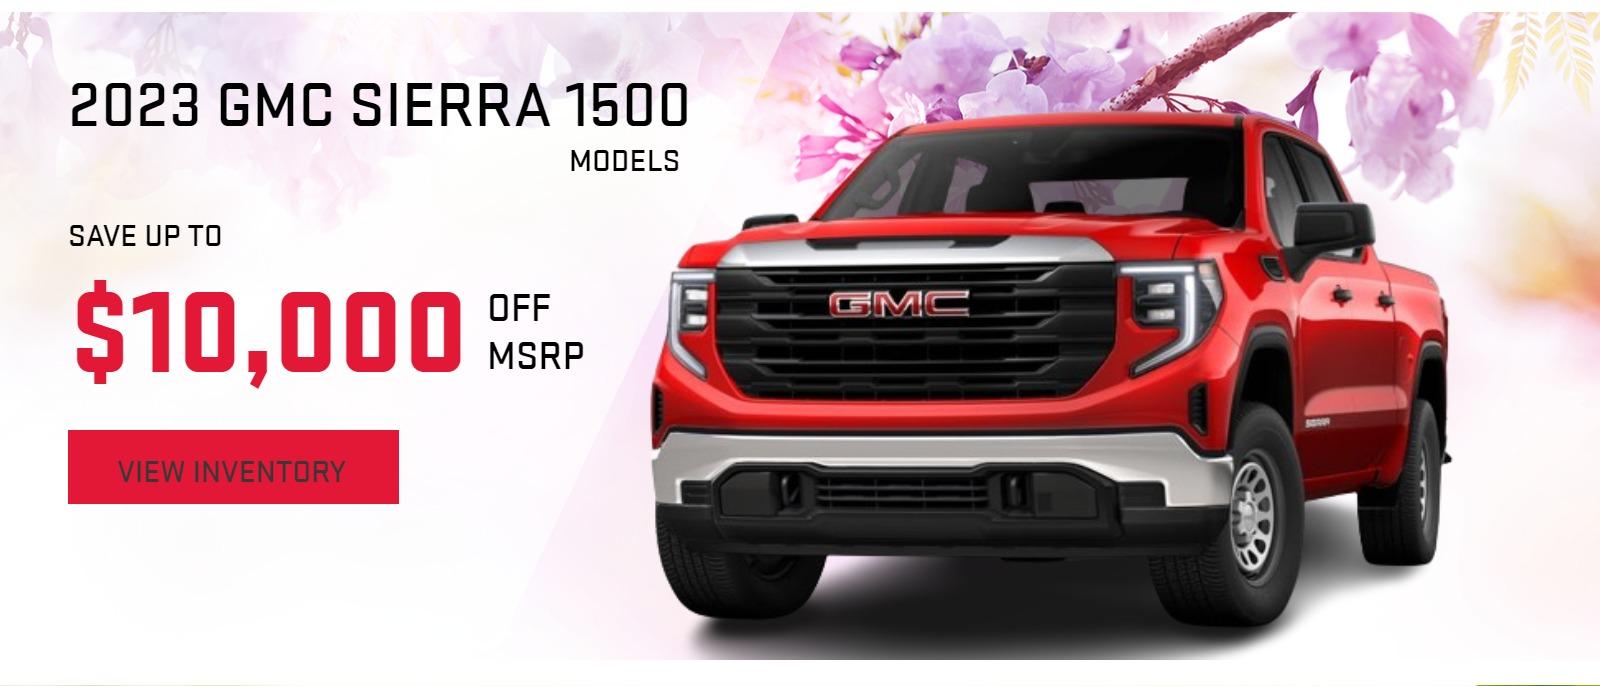 SAVE UP TO $7500.00 OFF MSRP